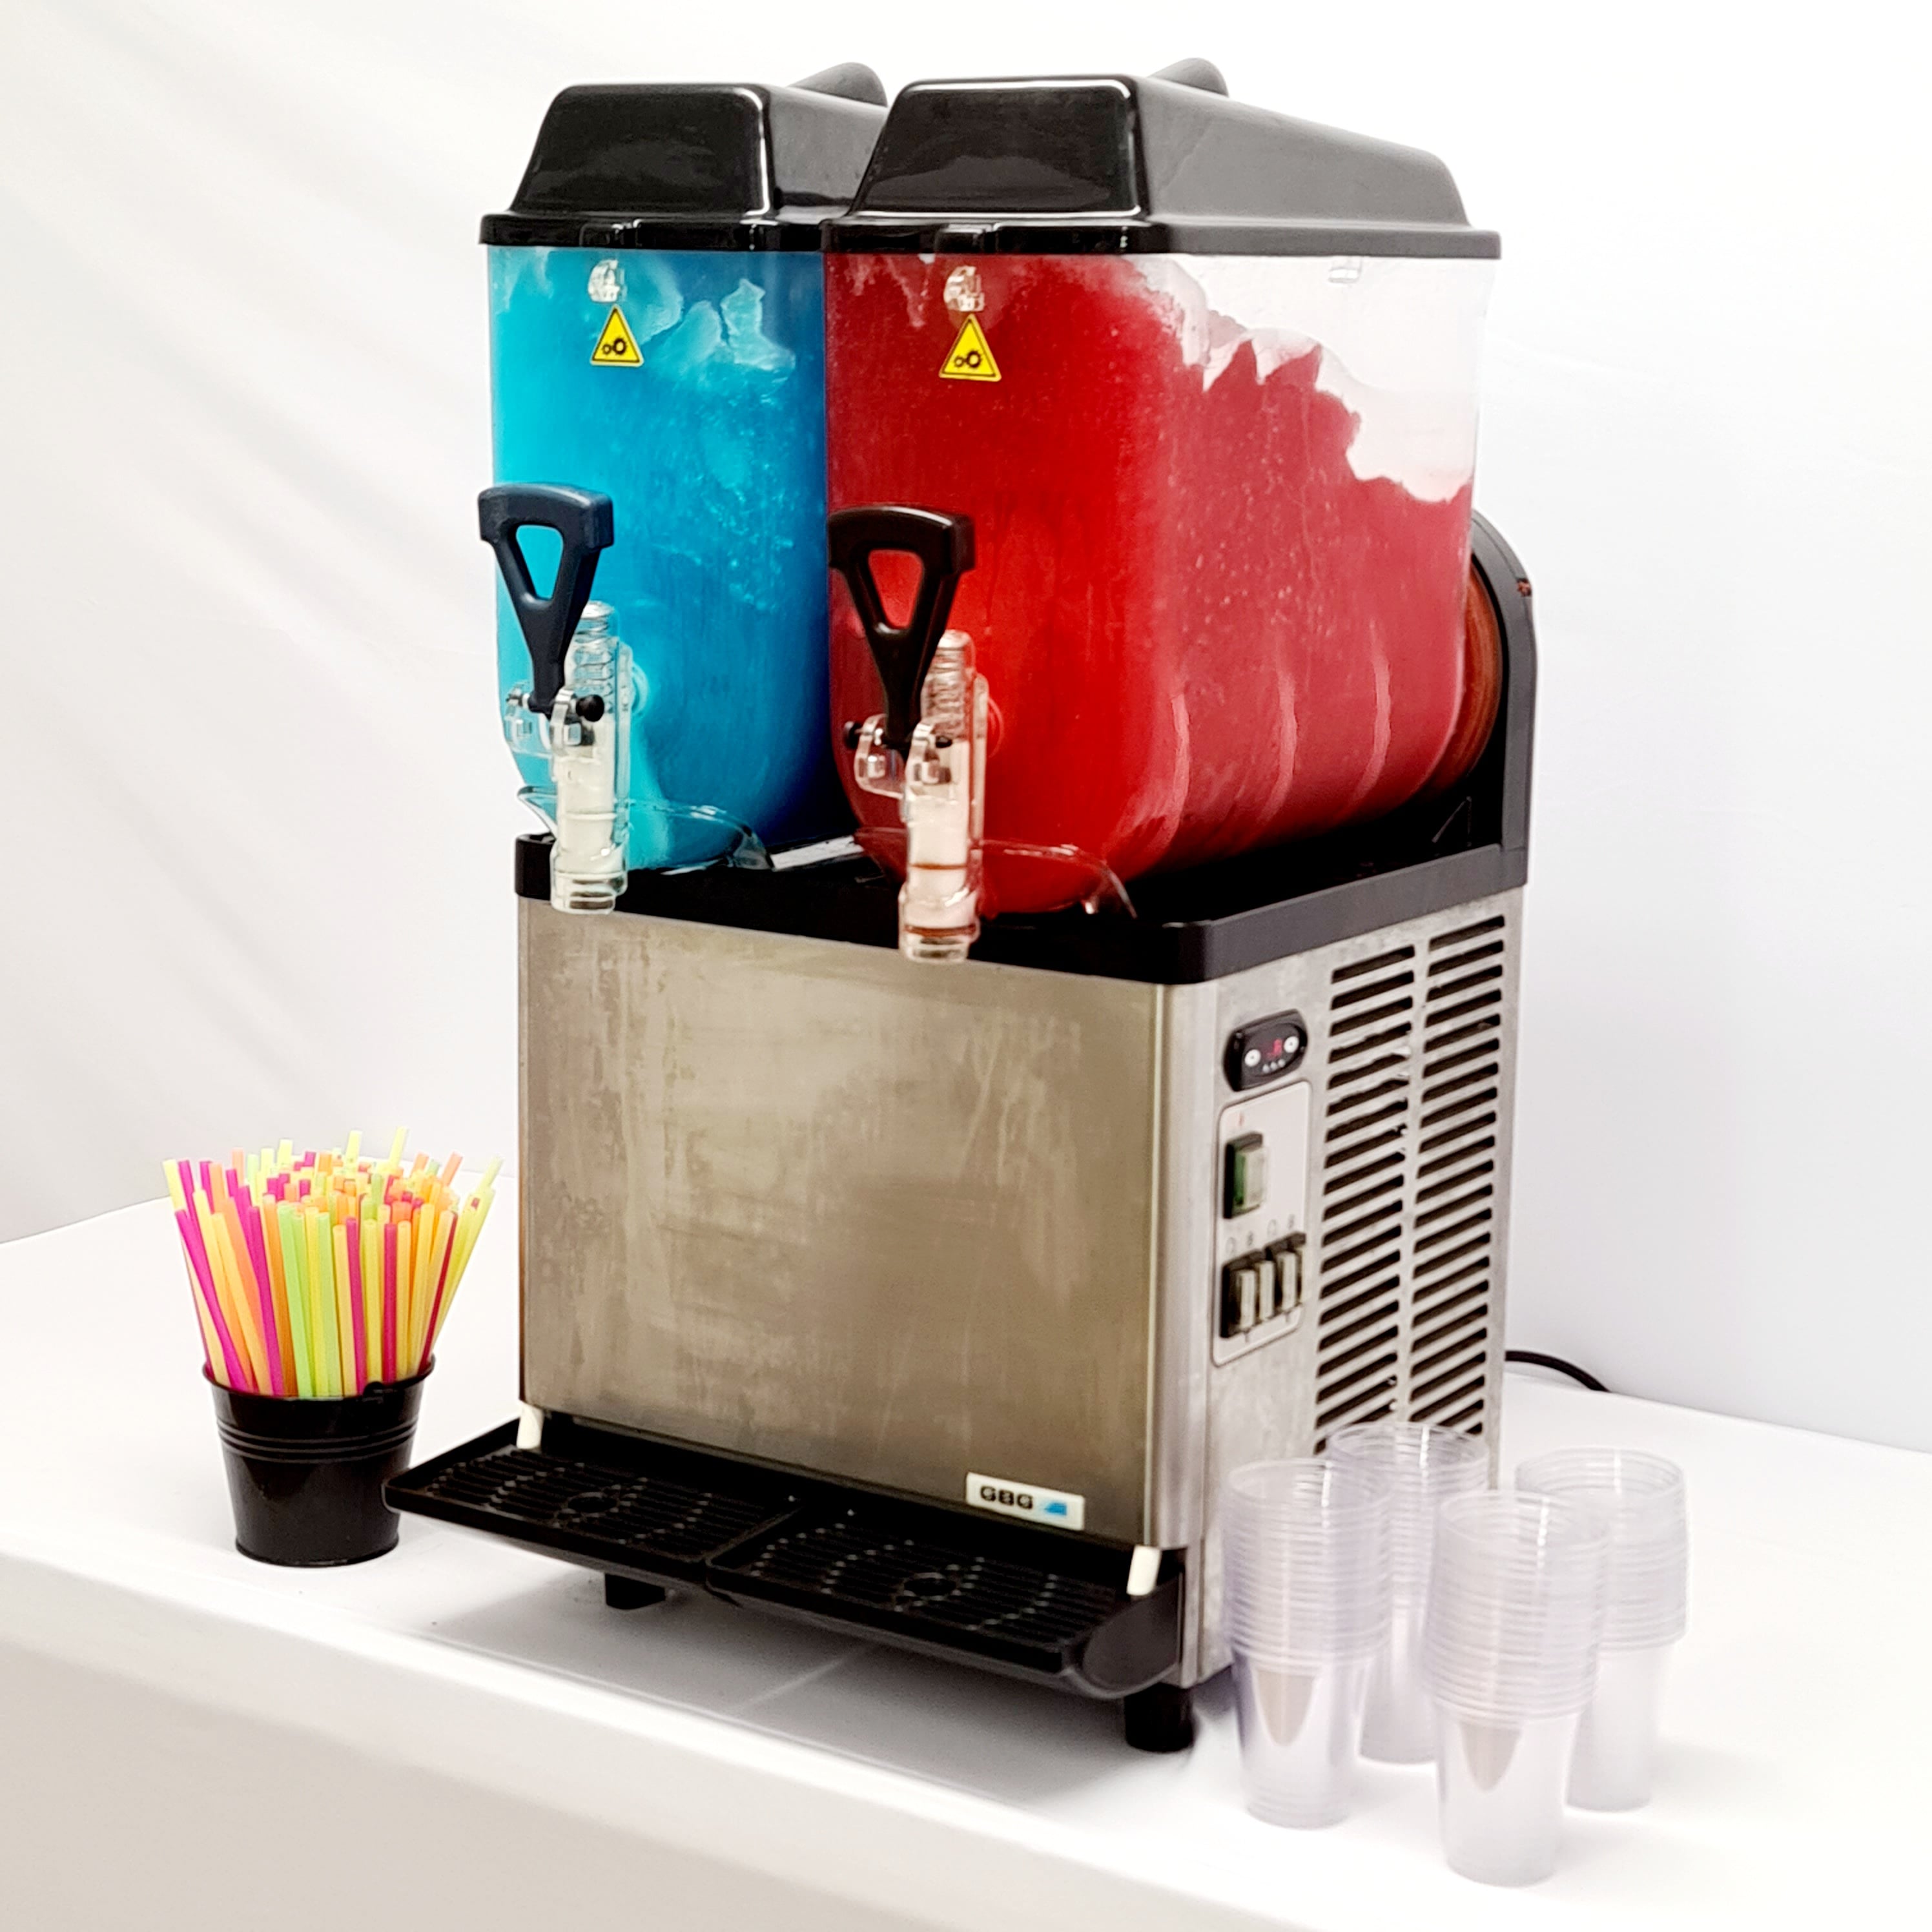 Slush Puppie Machine Hire by Carolyn's Sweets. Prices from